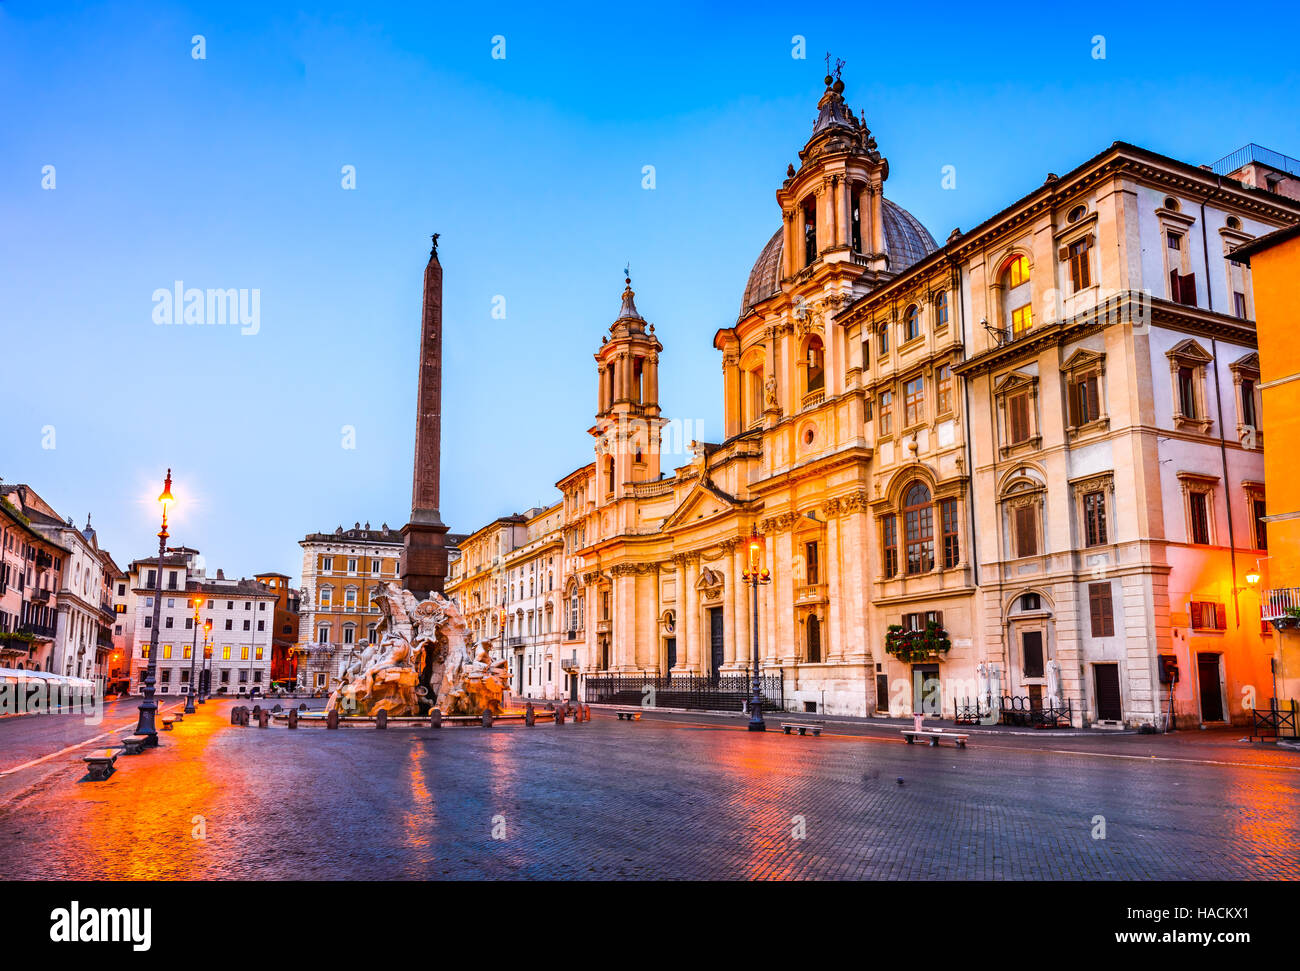 Rome, Italy. Night view of Sant Agnese Church in Piazza Navona, city square built on the site of the Stadium of Domitian. Stock Photo